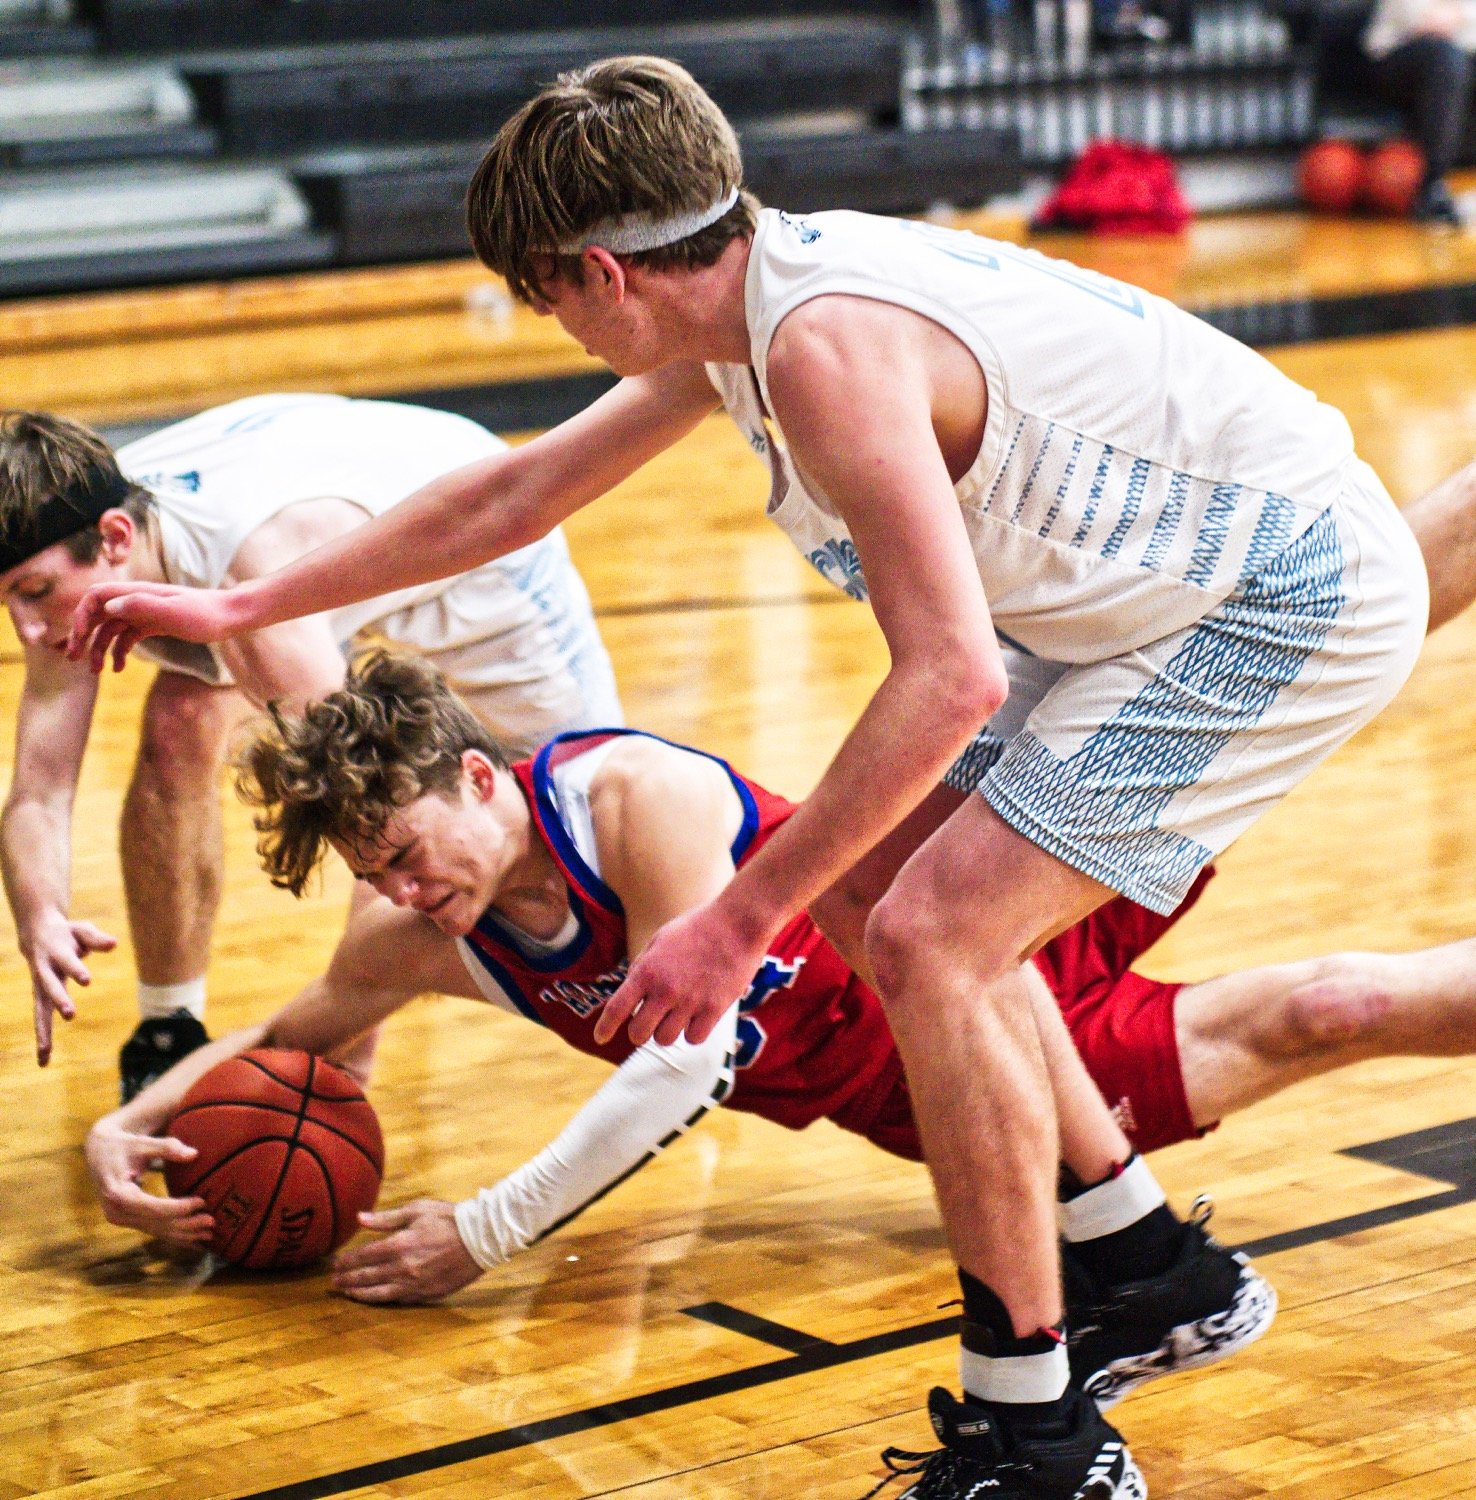 Jerry Skinner puts in the effort to successfully secure a loose ball.